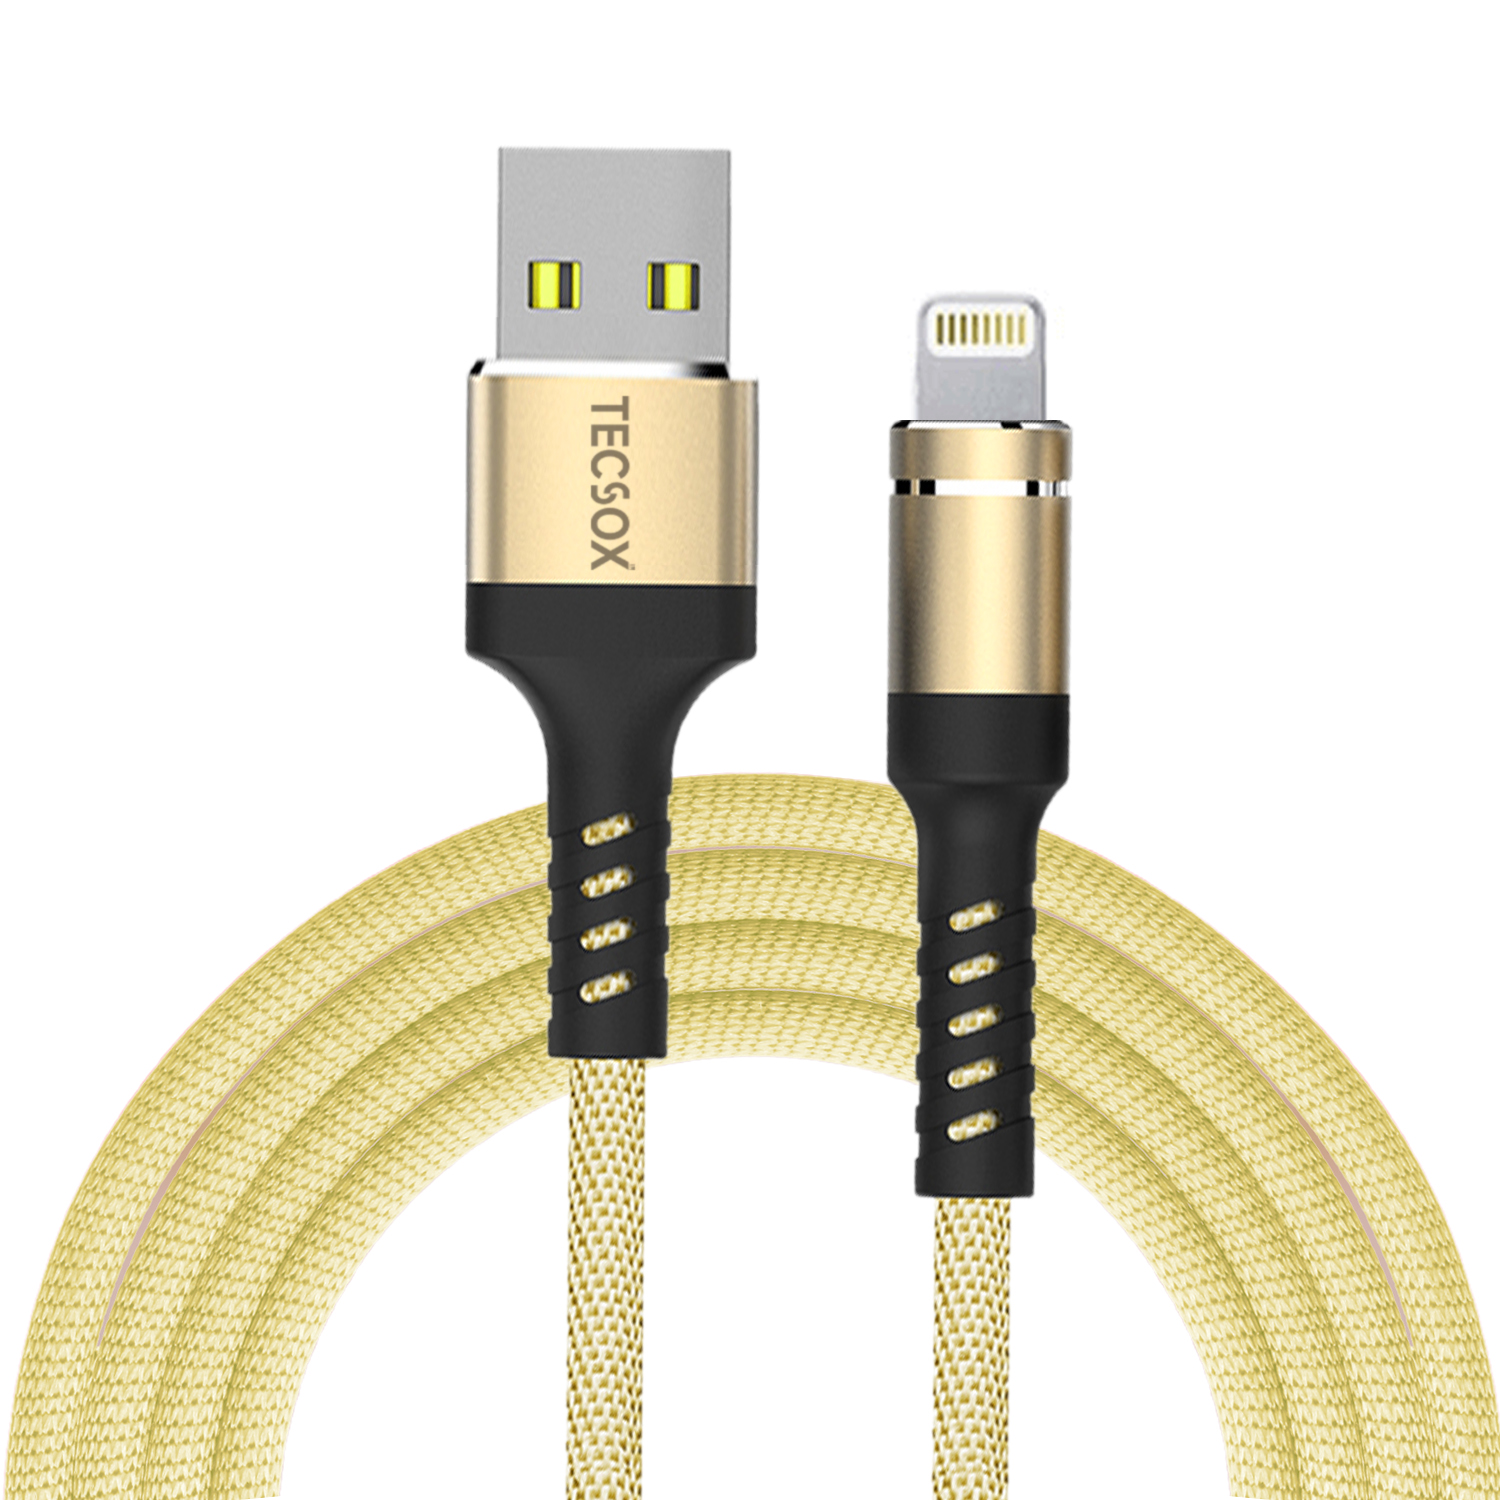 TecSox TecWire Lightning End Braided Fast Charging Cable Compatible for iPhone with MFI Certified  1 Meter, Gold 